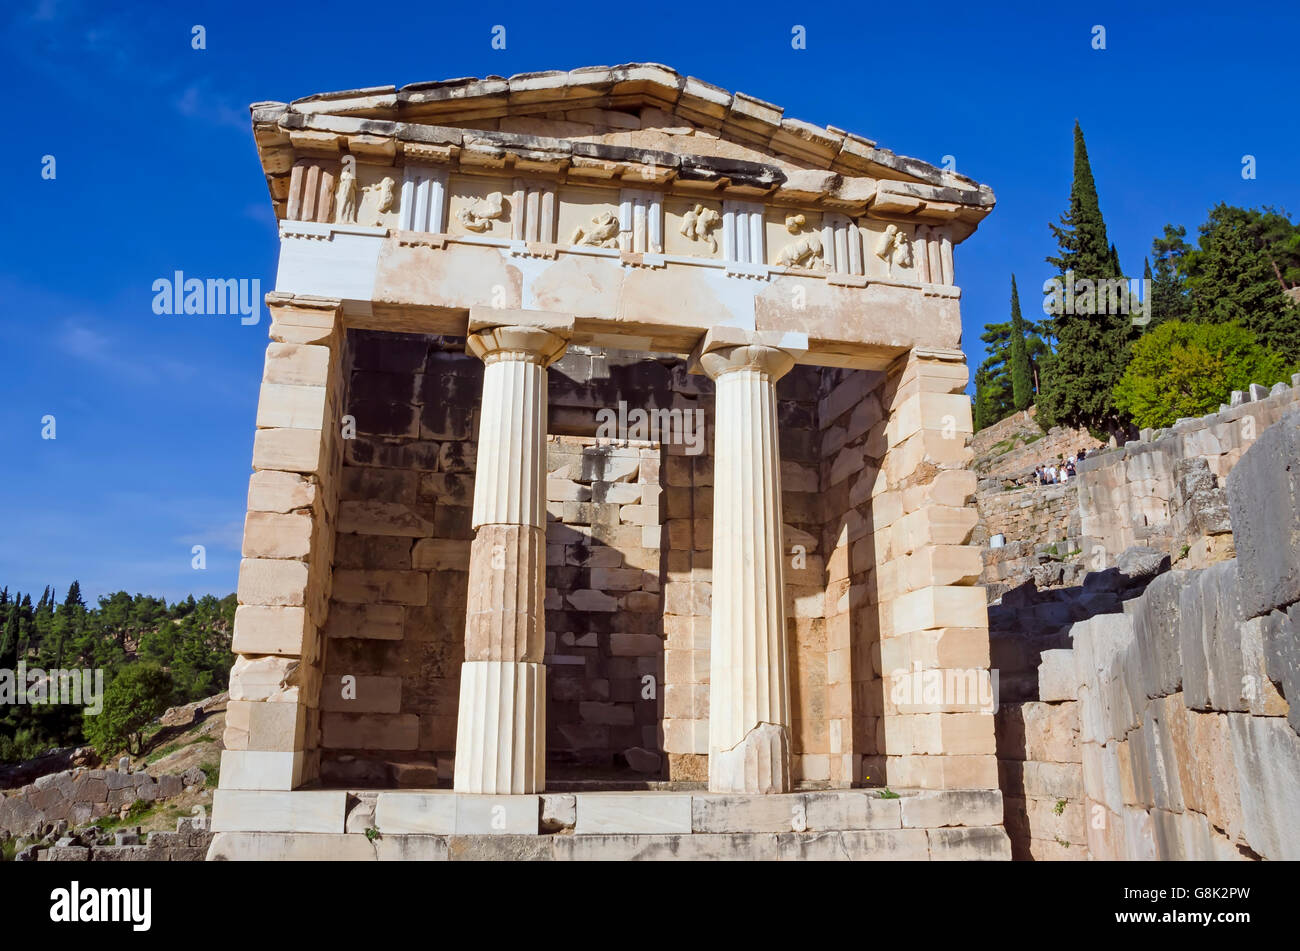 Treasury of the Athenians at Archaeological Site of Delphi Greece Stock Photo